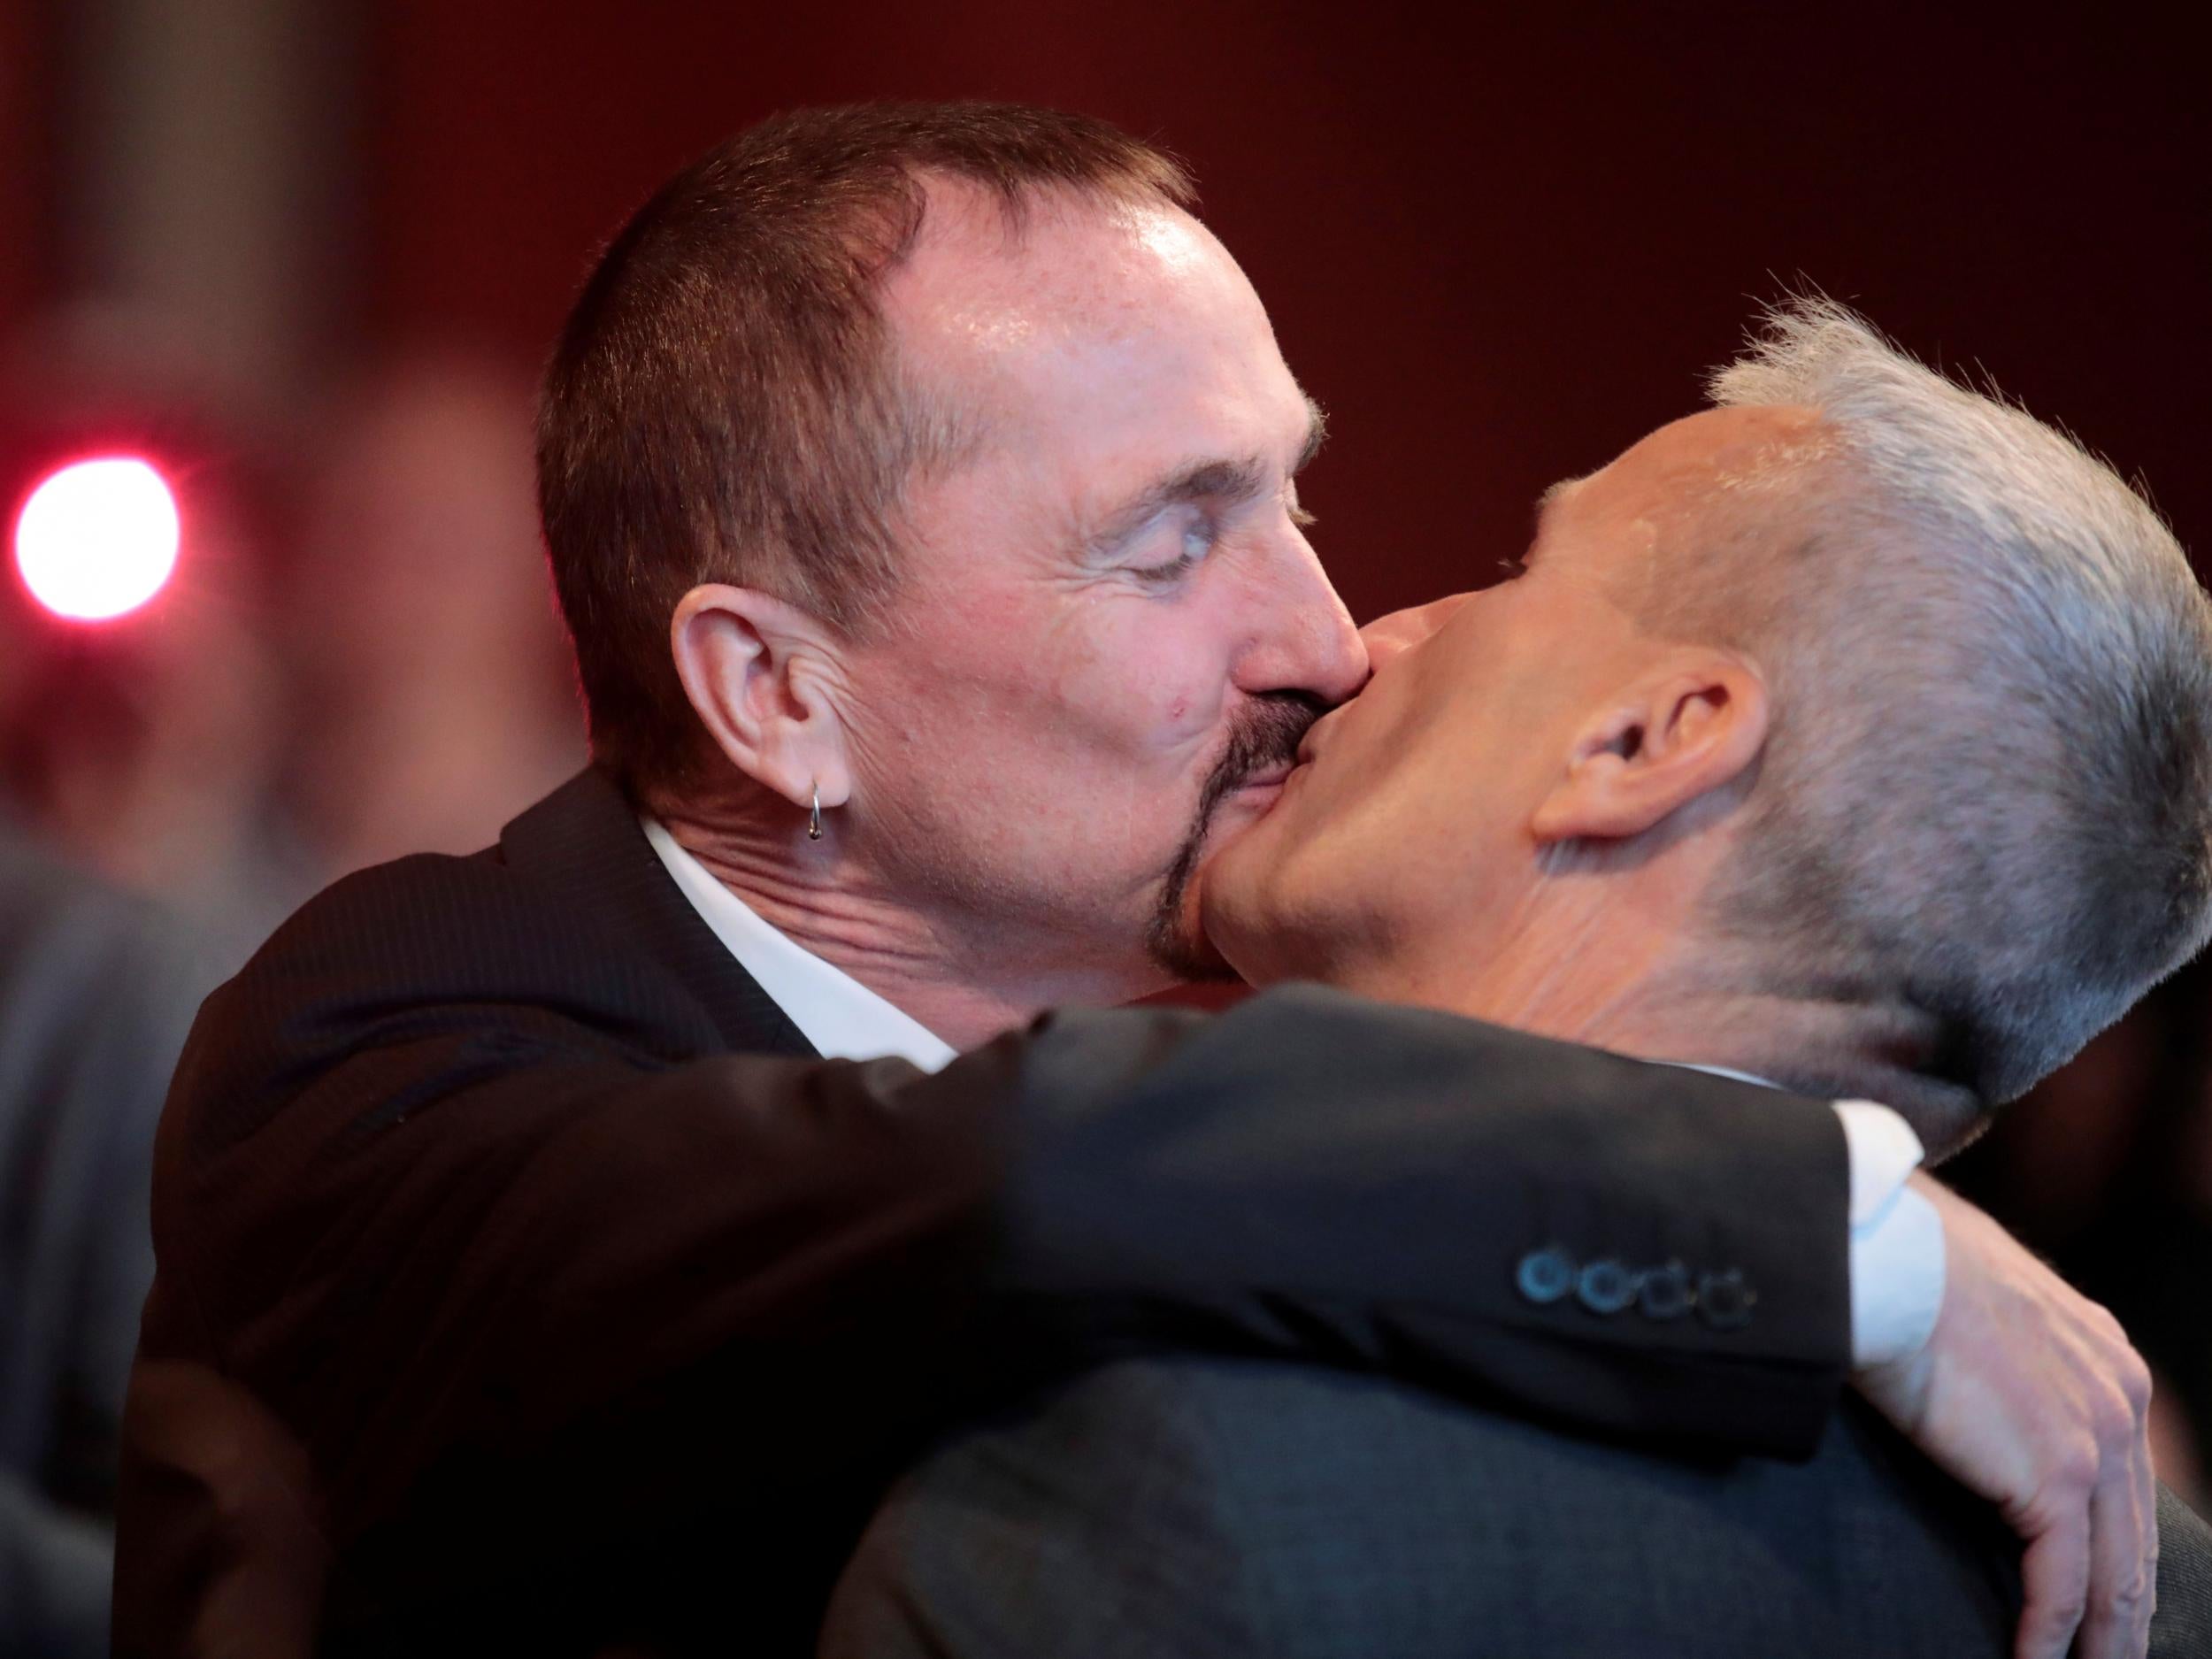 Karl Kreile and Bodo Mende kiss after getting married at a civil registry office, becoming Germany's first married gay couple